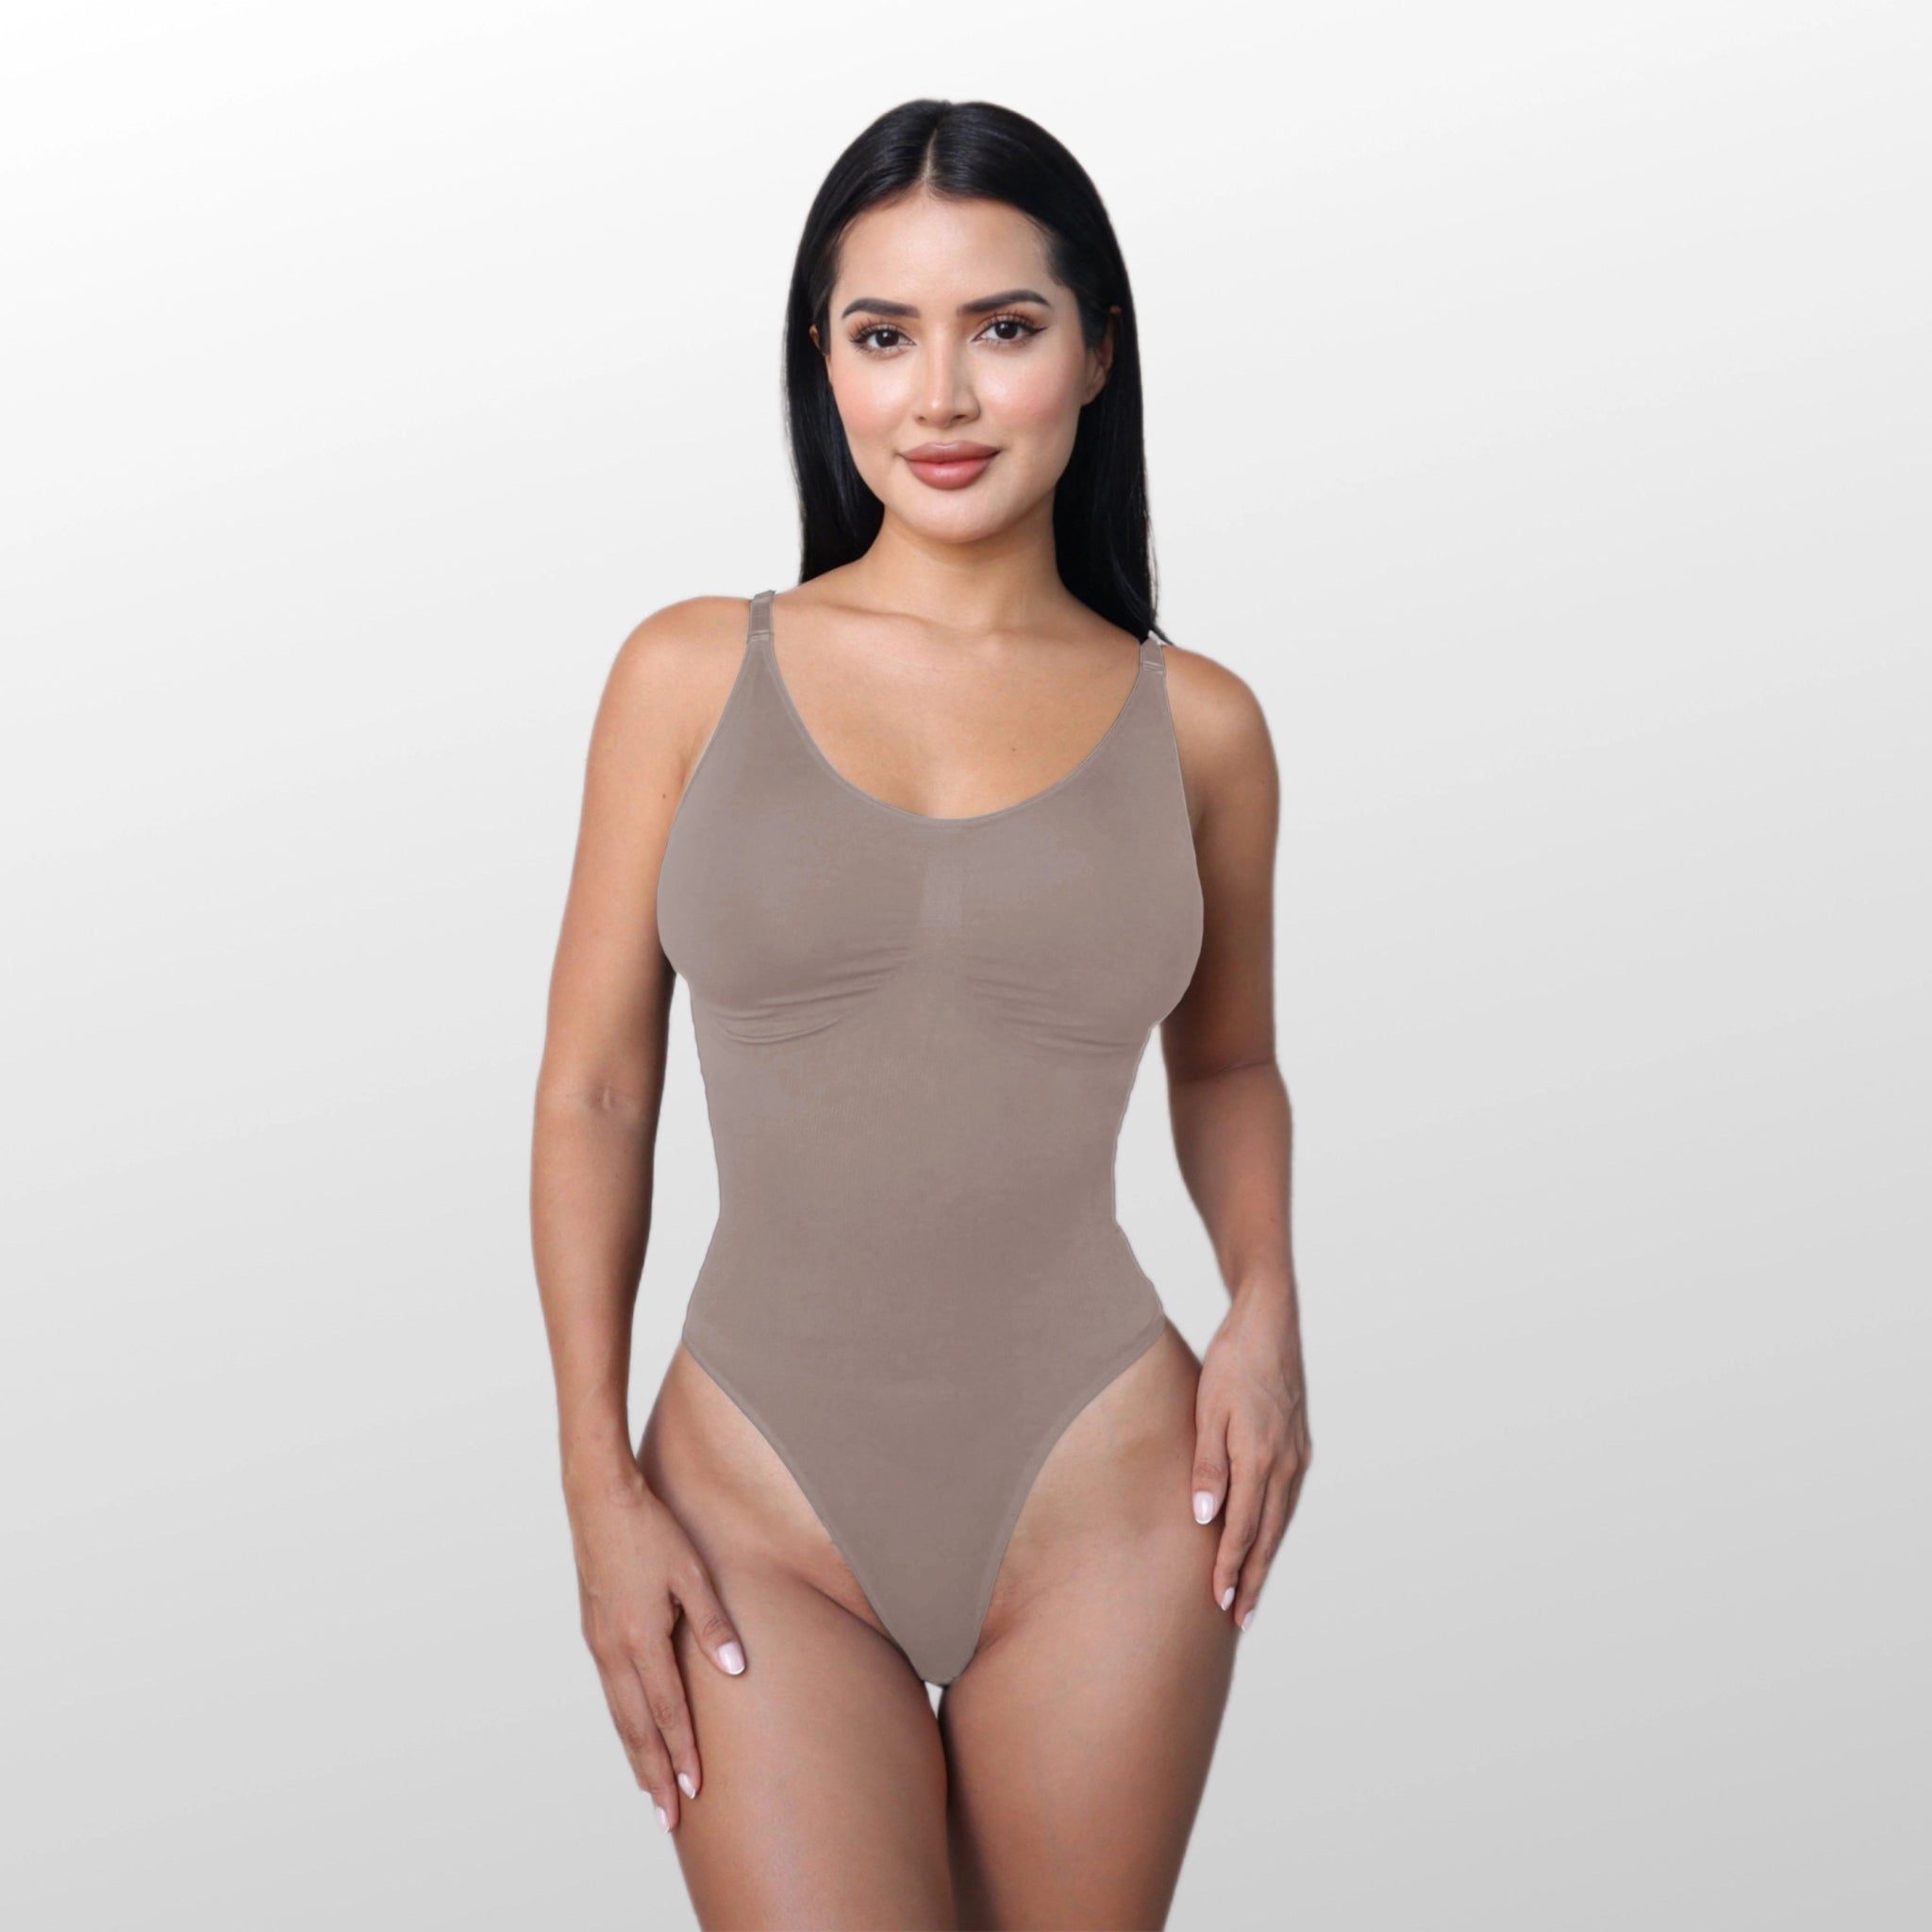 Luxmery Sculpting Bodysuits Bundle - Get the Ultimate Shaping